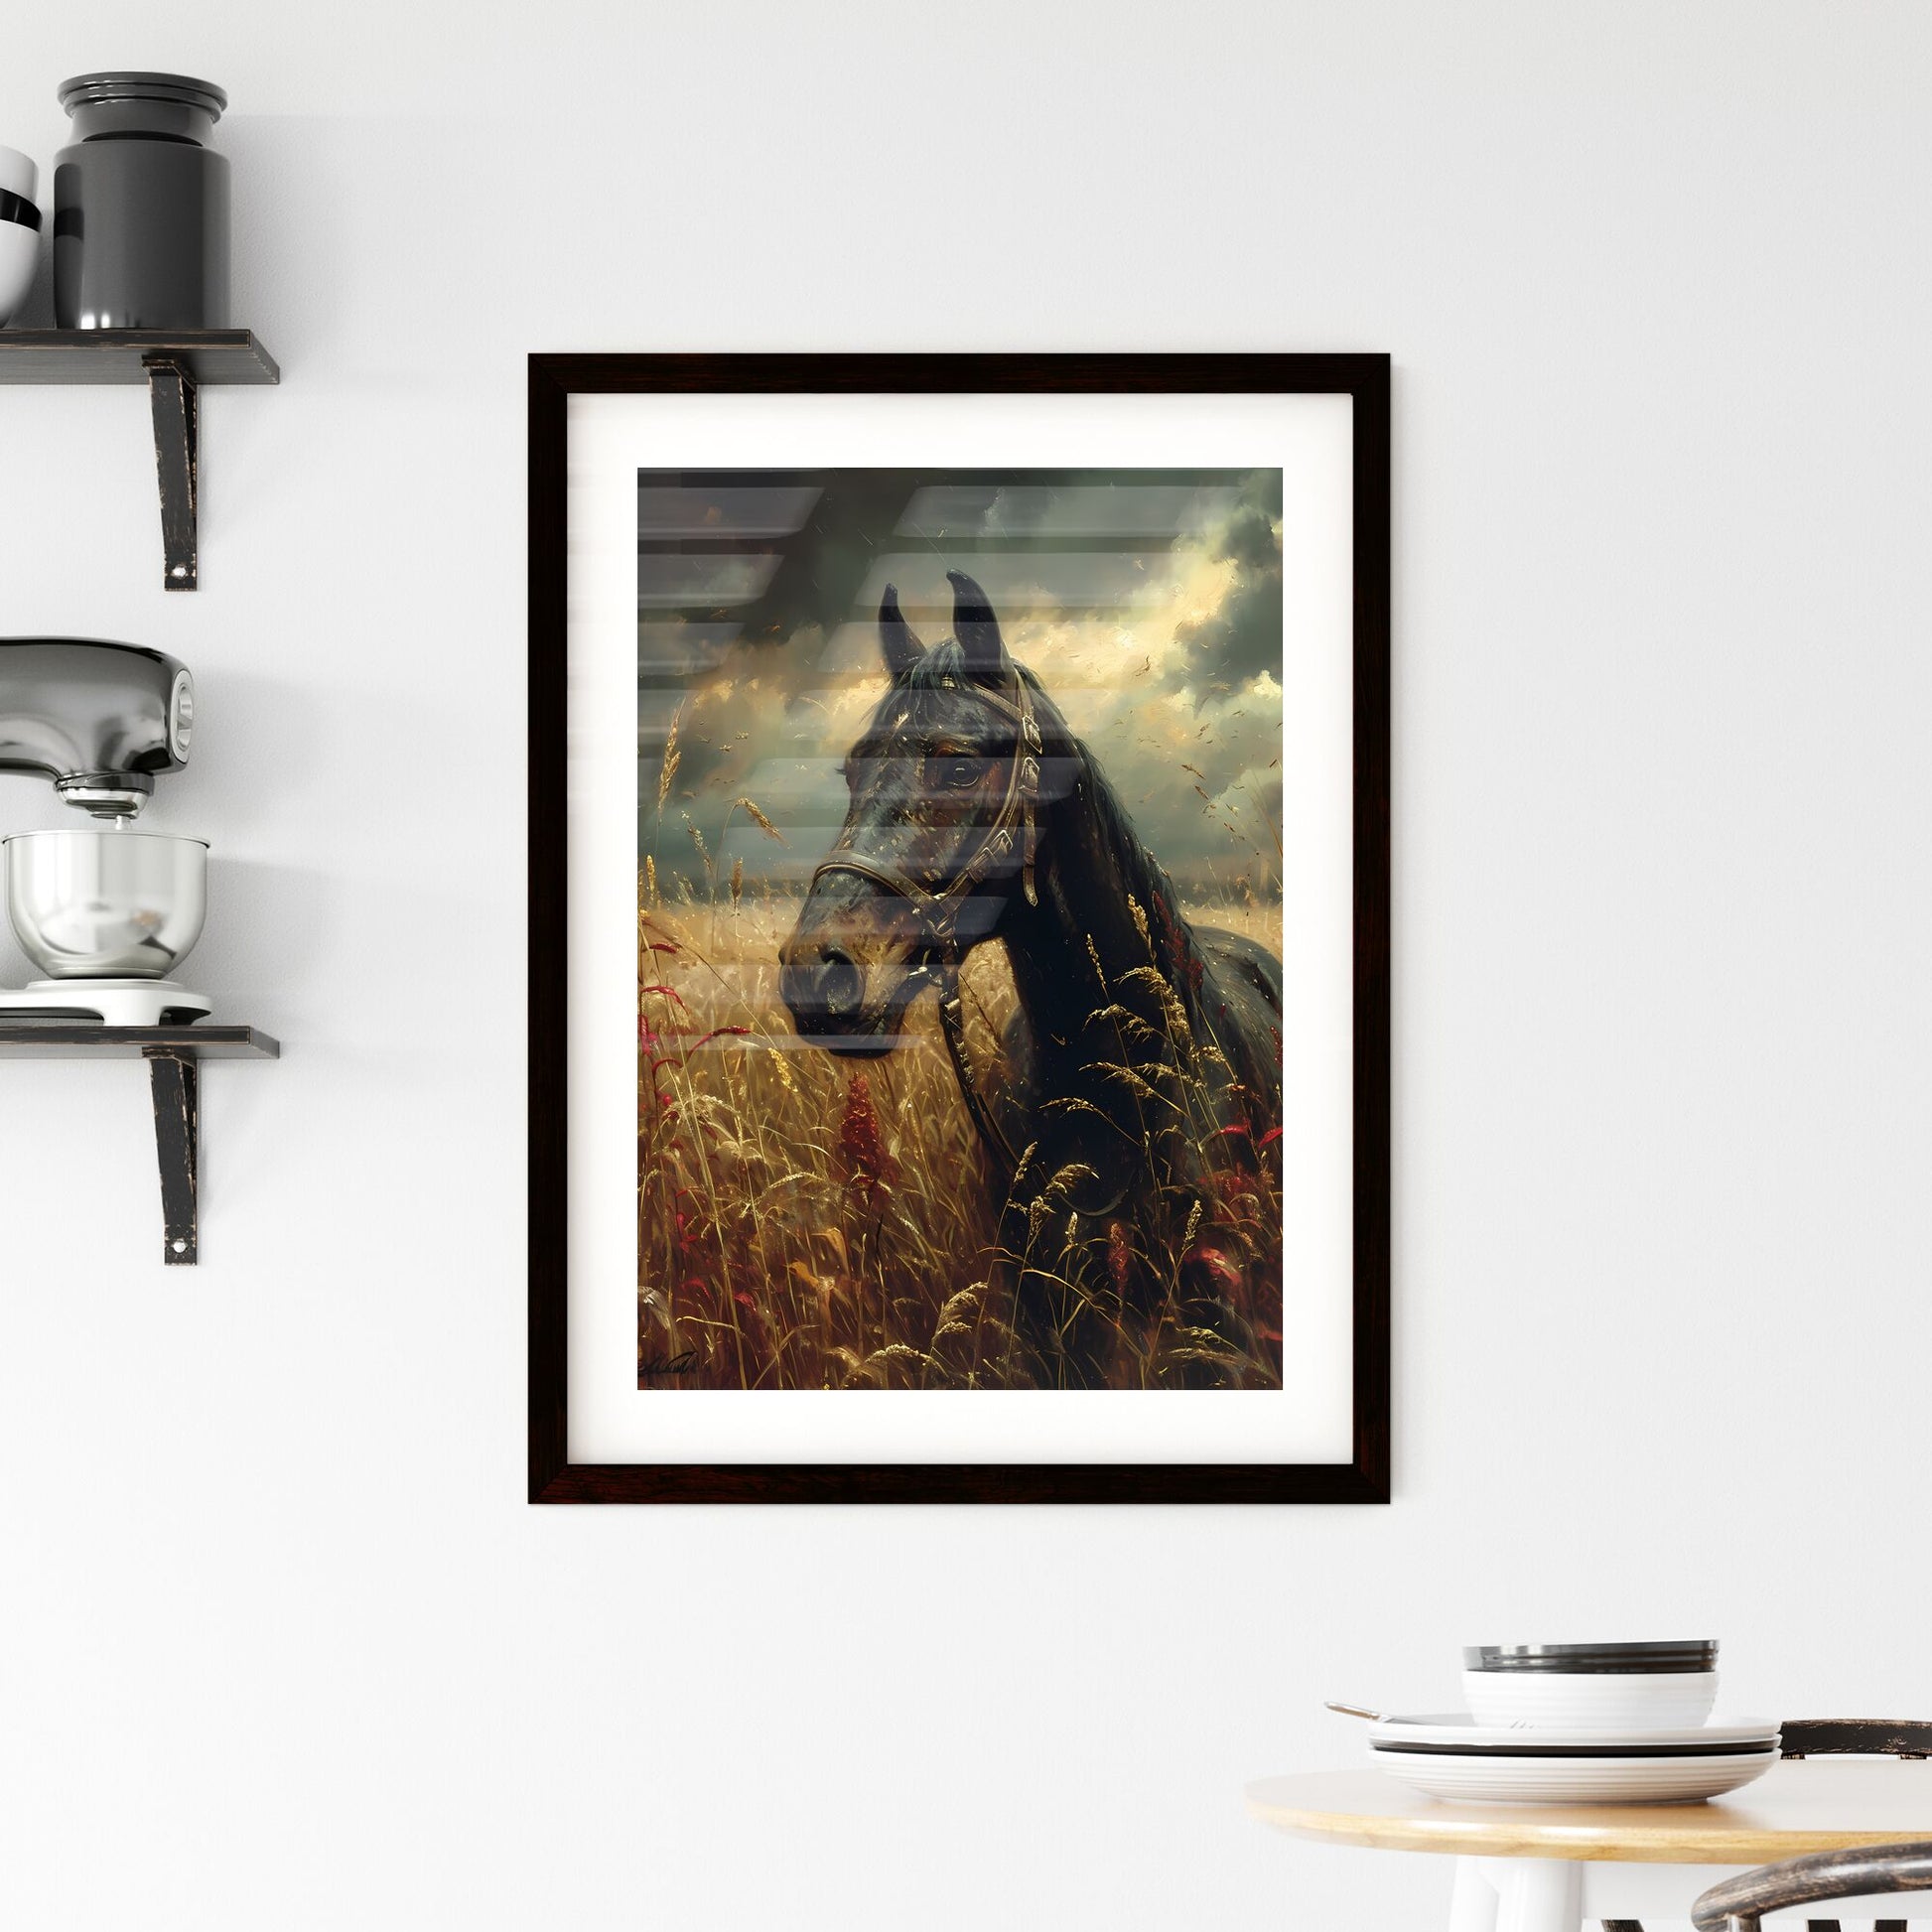 A vintage painting featuring a wild black horse - Art print of a blue water with a sandy beach and blue sky Default Title